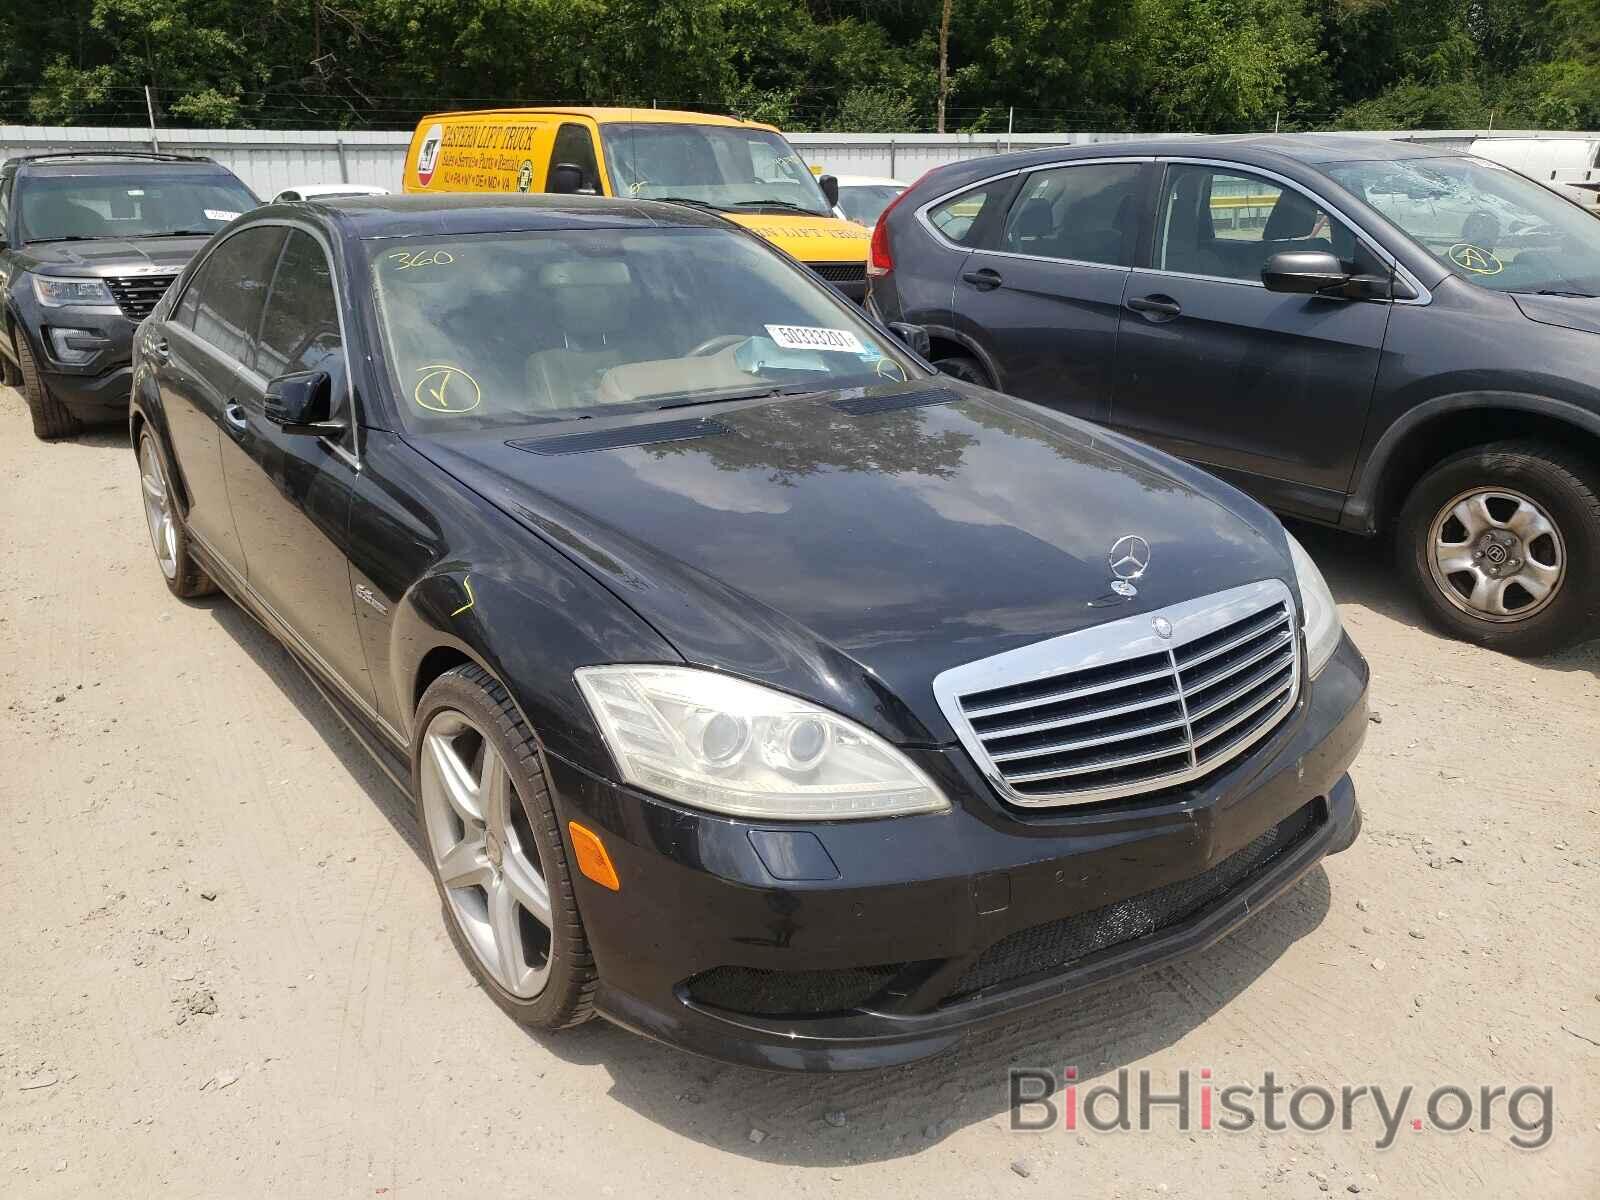 Photo WDDNG7HB2AA315402 - MERCEDES-BENZ AMG 2010